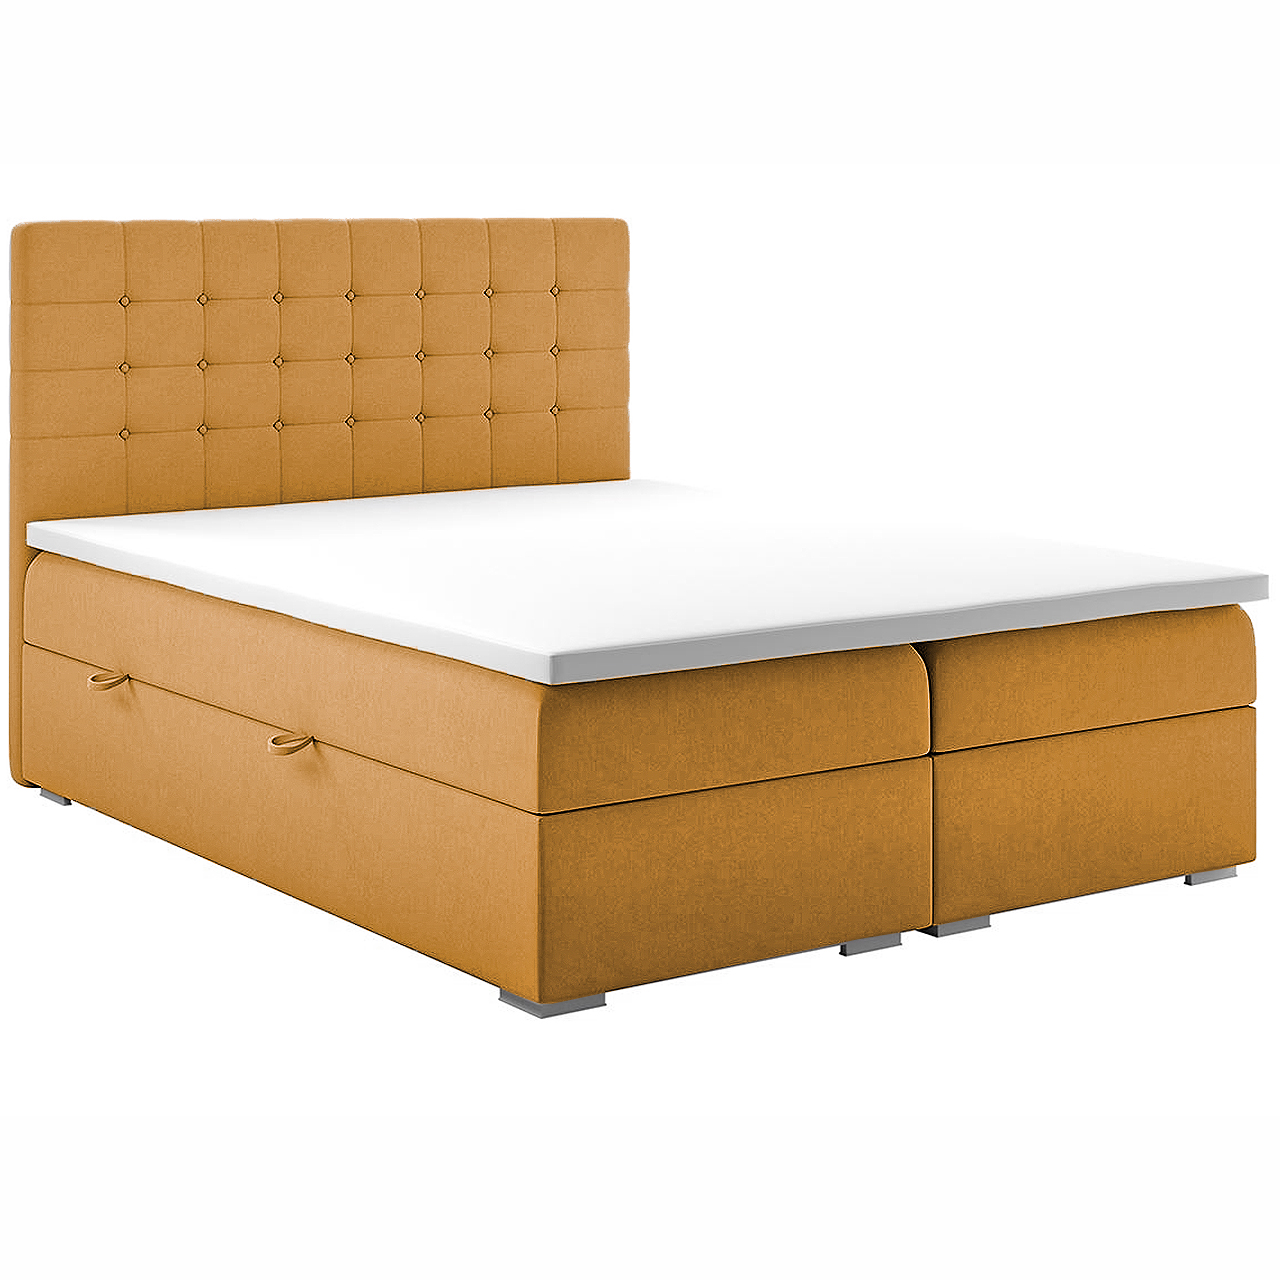 Upholstered bed CLAUDIS 160x200 riviera 41